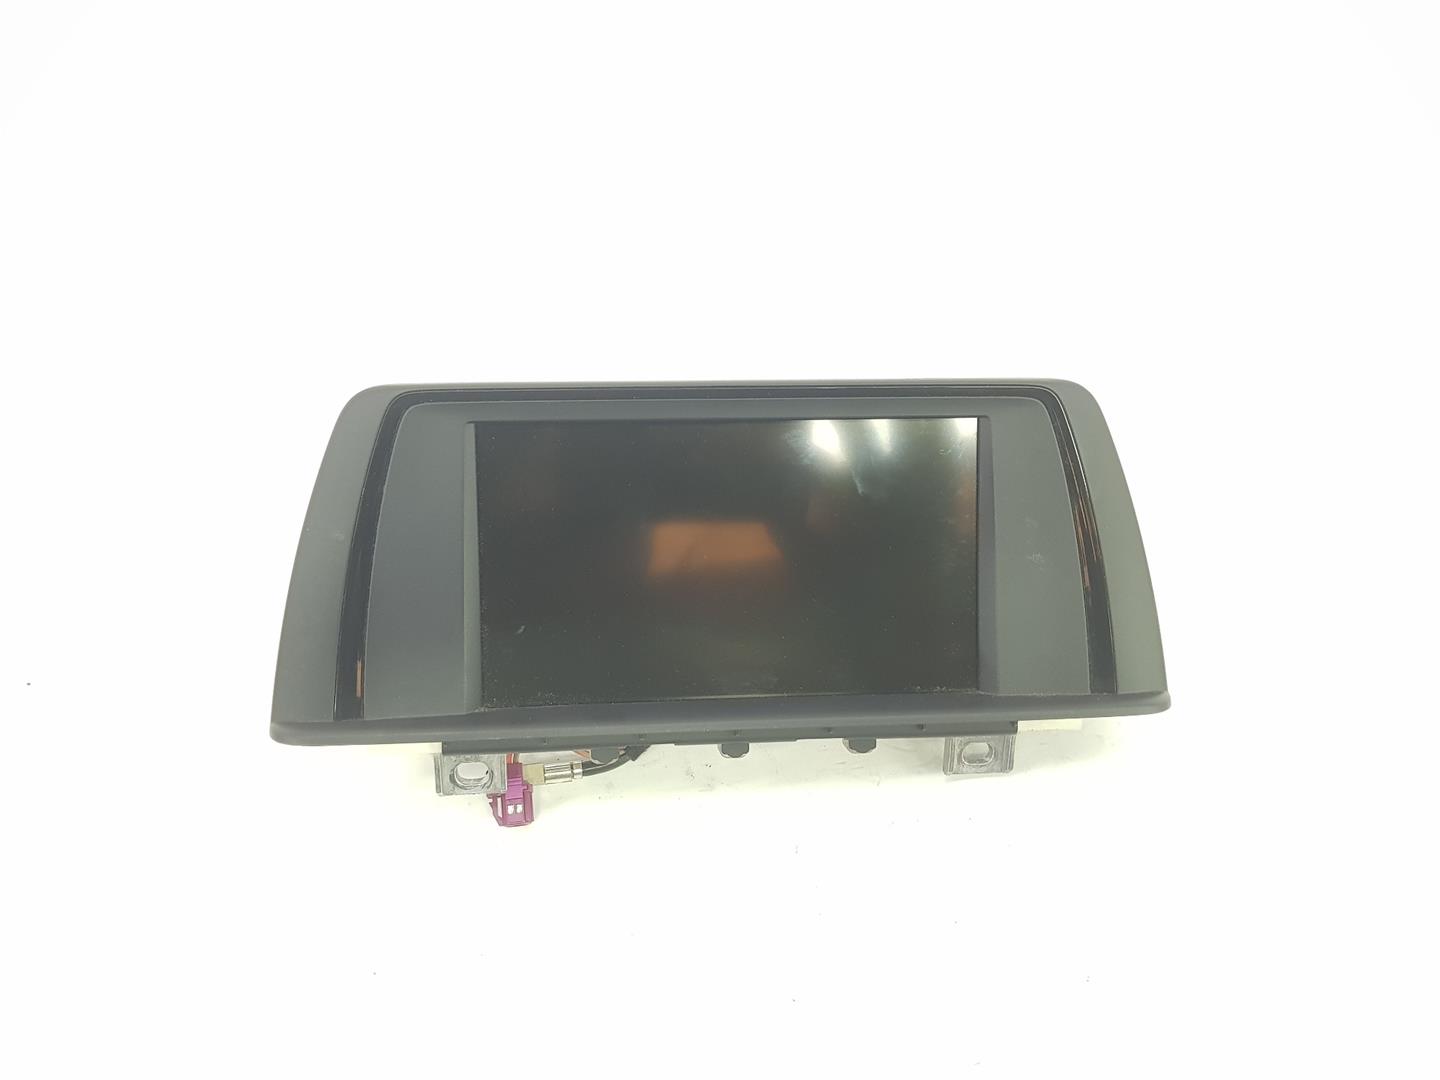 BMW 1 Series F20/F21 (2011-2020) Other Interior Parts 65509270391, 65509270391 19894052